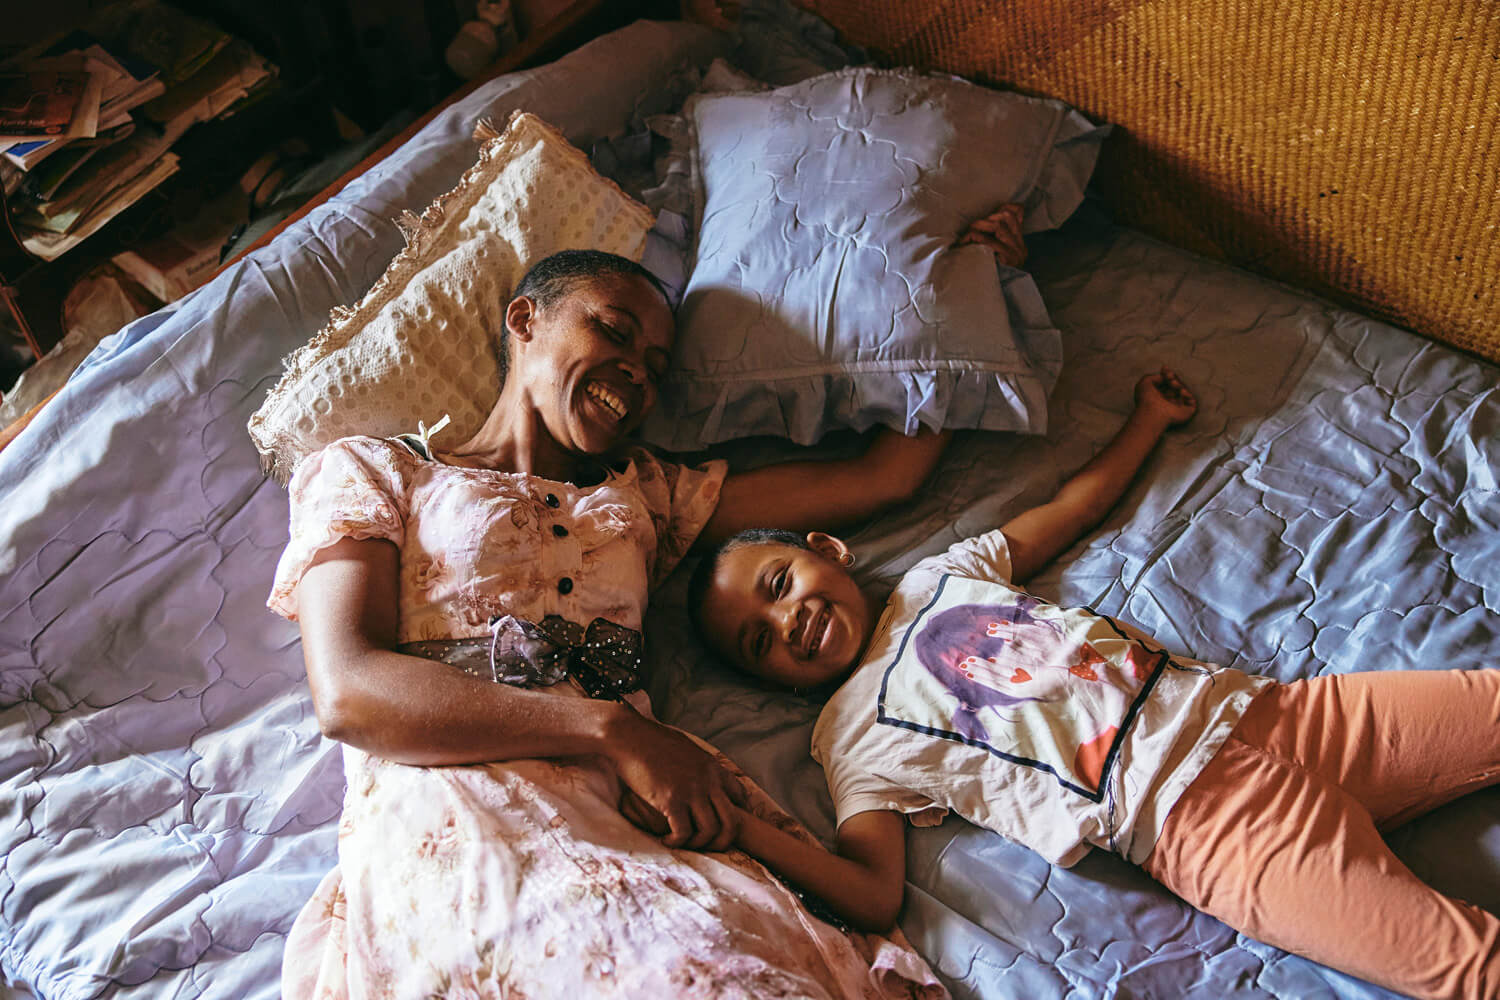 A woman and a young child lying on a bed, laughing and holding hands, showcasing a moment of joy and familial love.